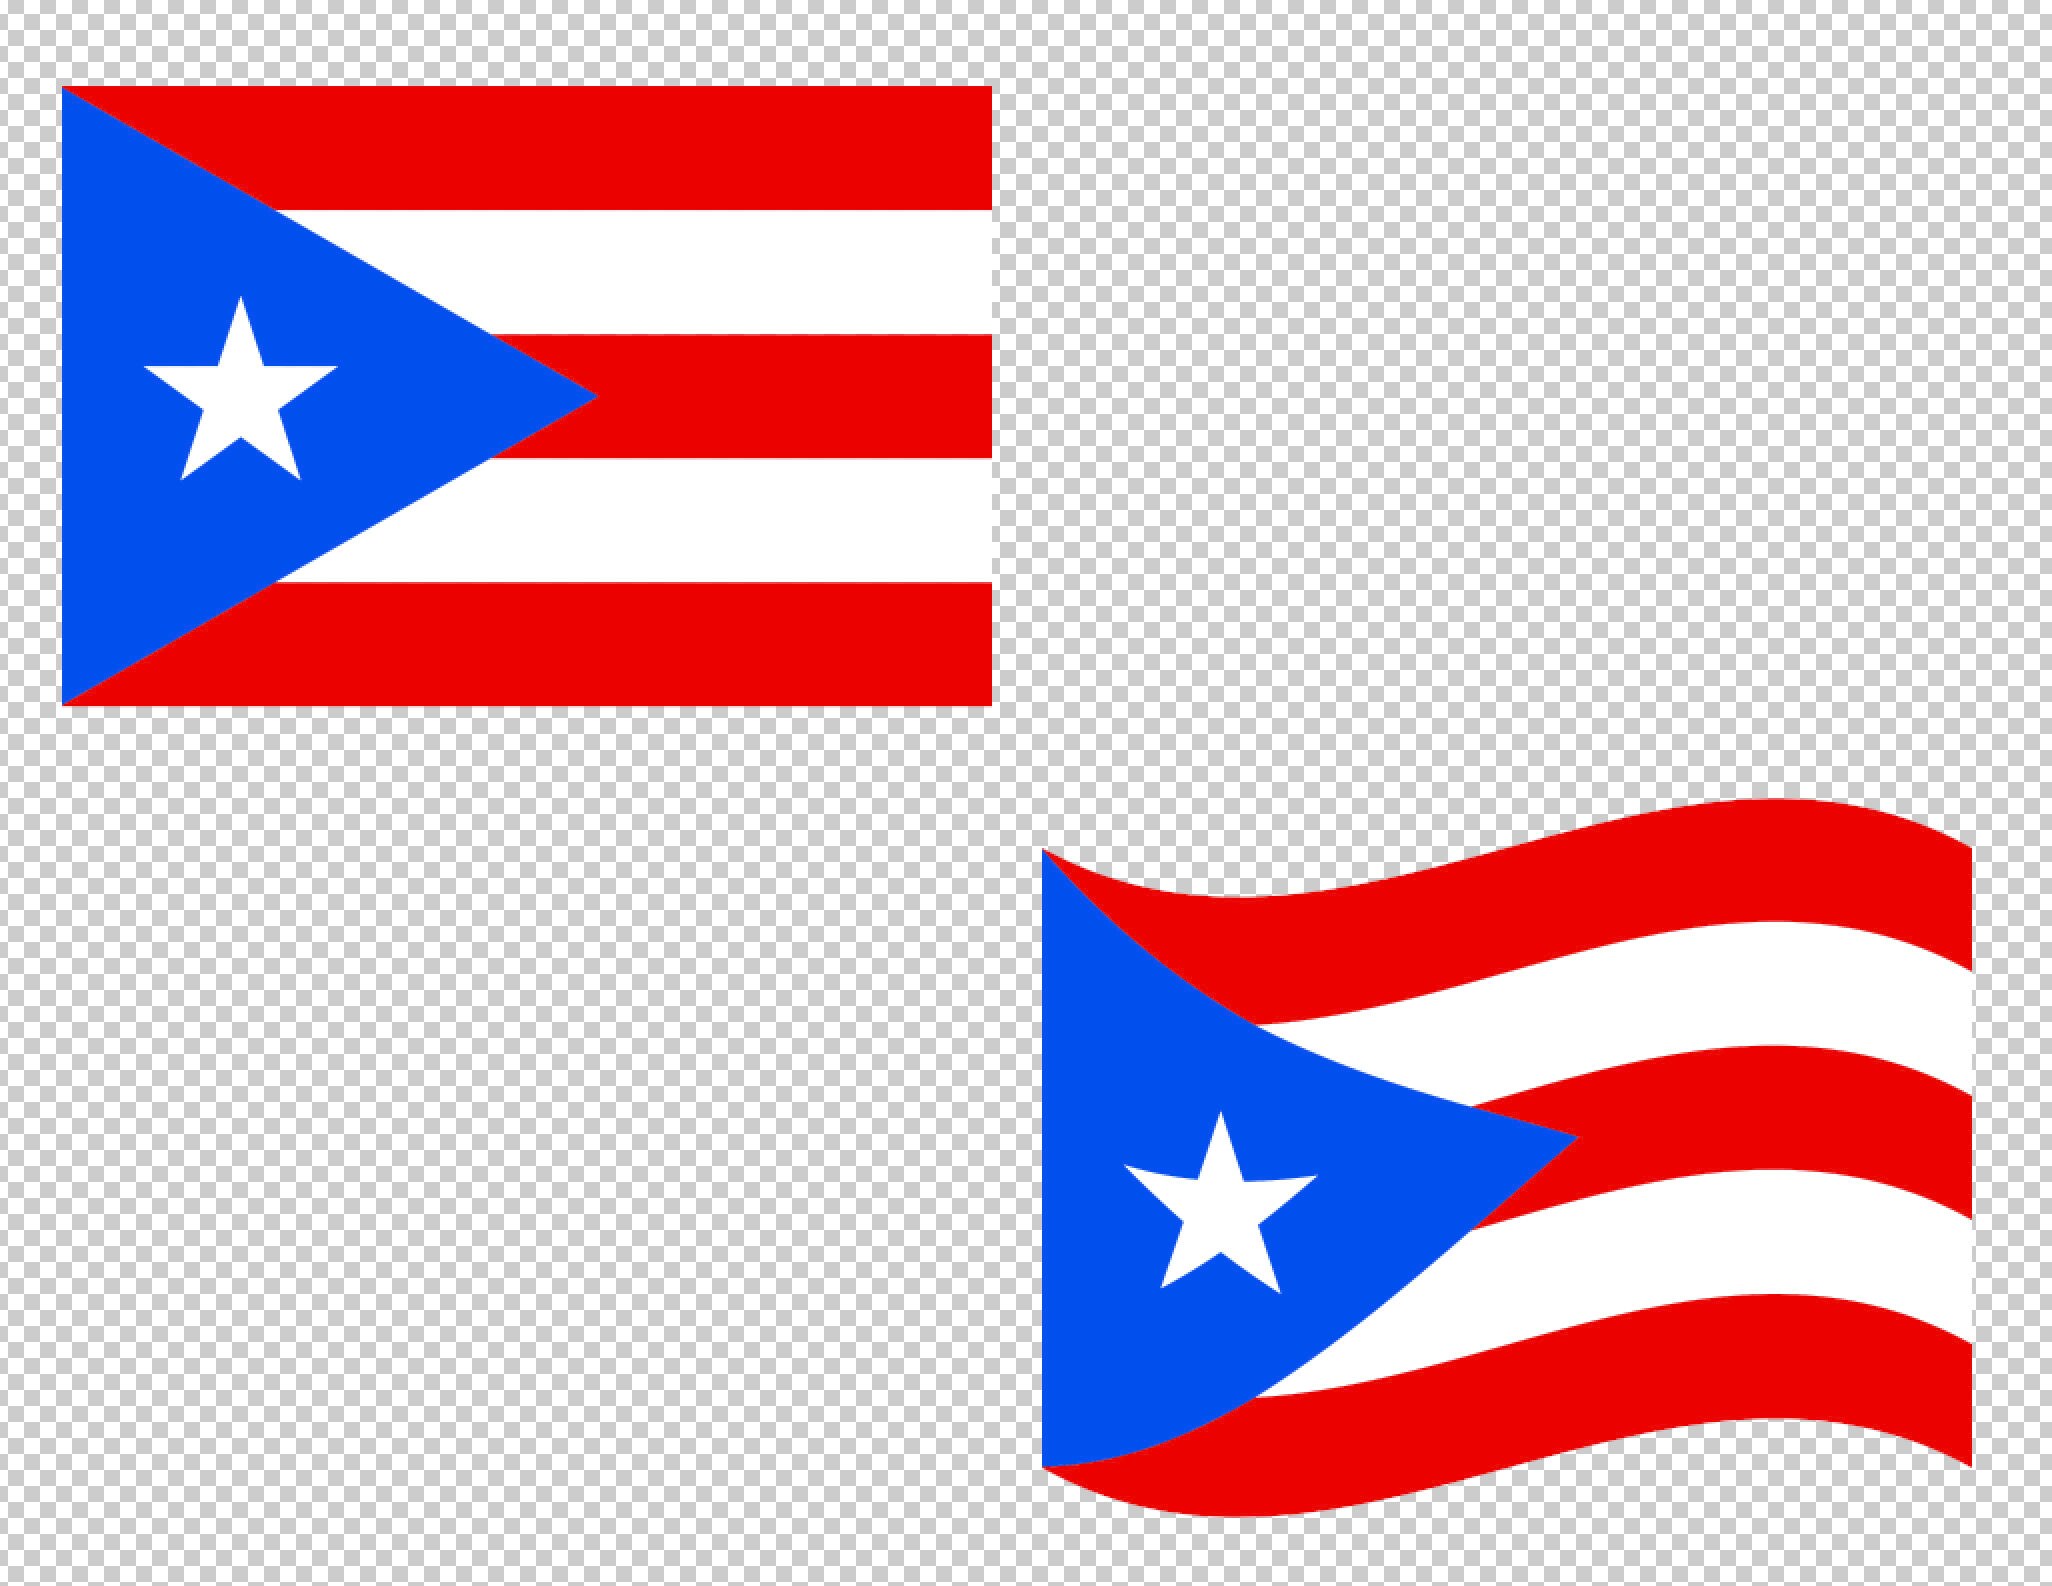 Download Puerto Rico Flag SVG Vector Clip Art - Cutting Files for ...